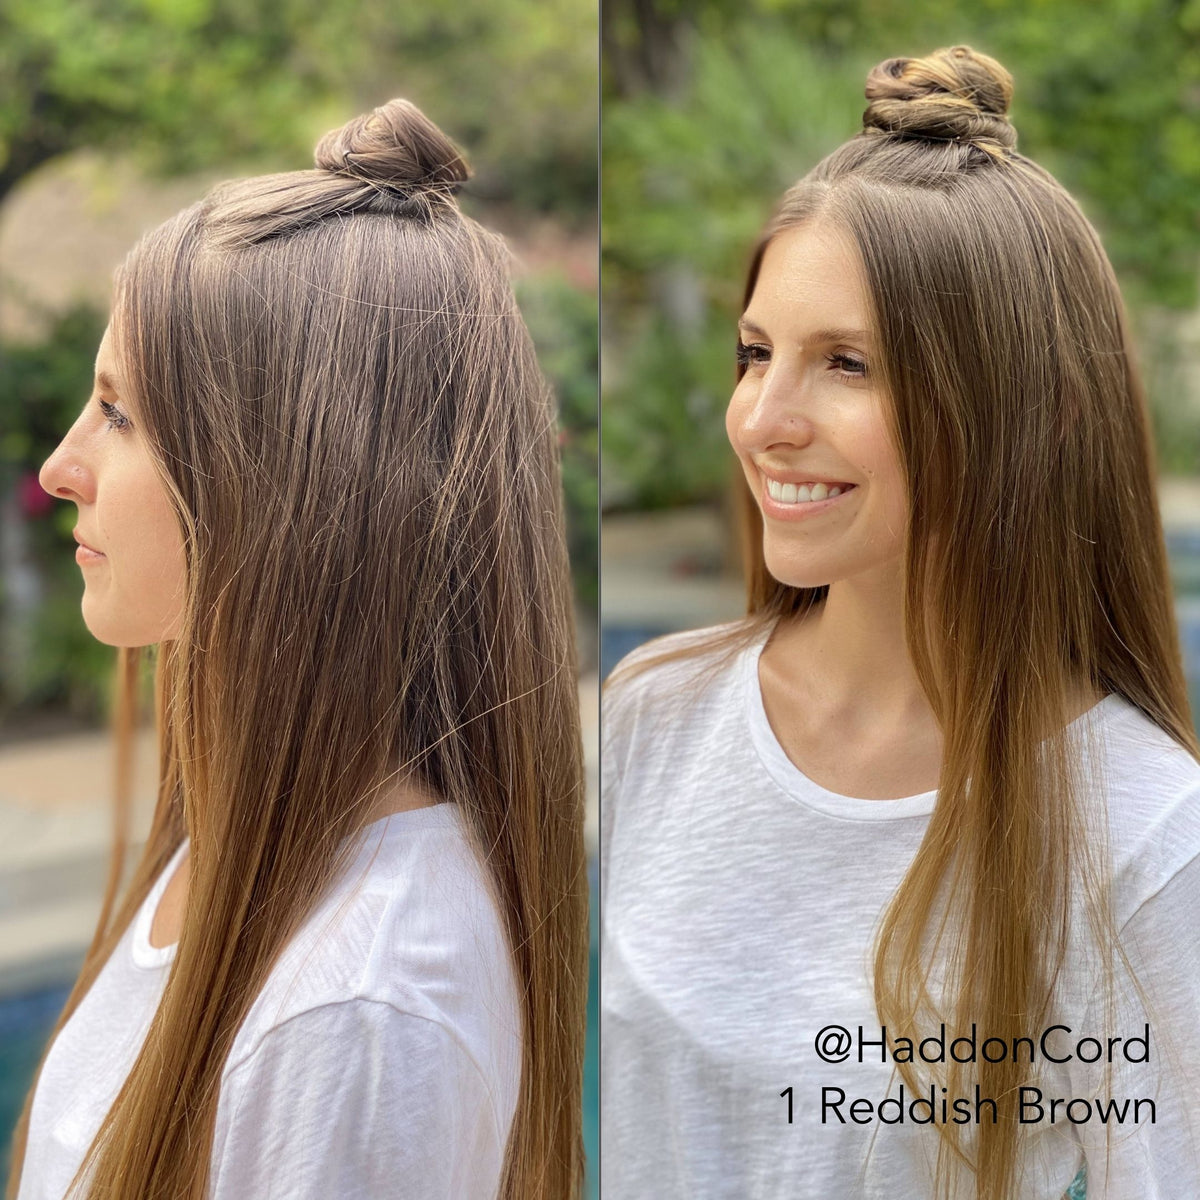 Transformational photo showing Before After Hairstyle from Fine Hair to a Bigger Half UP, Half Down Topknot Bun on a woman with long brown hair in a white shirt